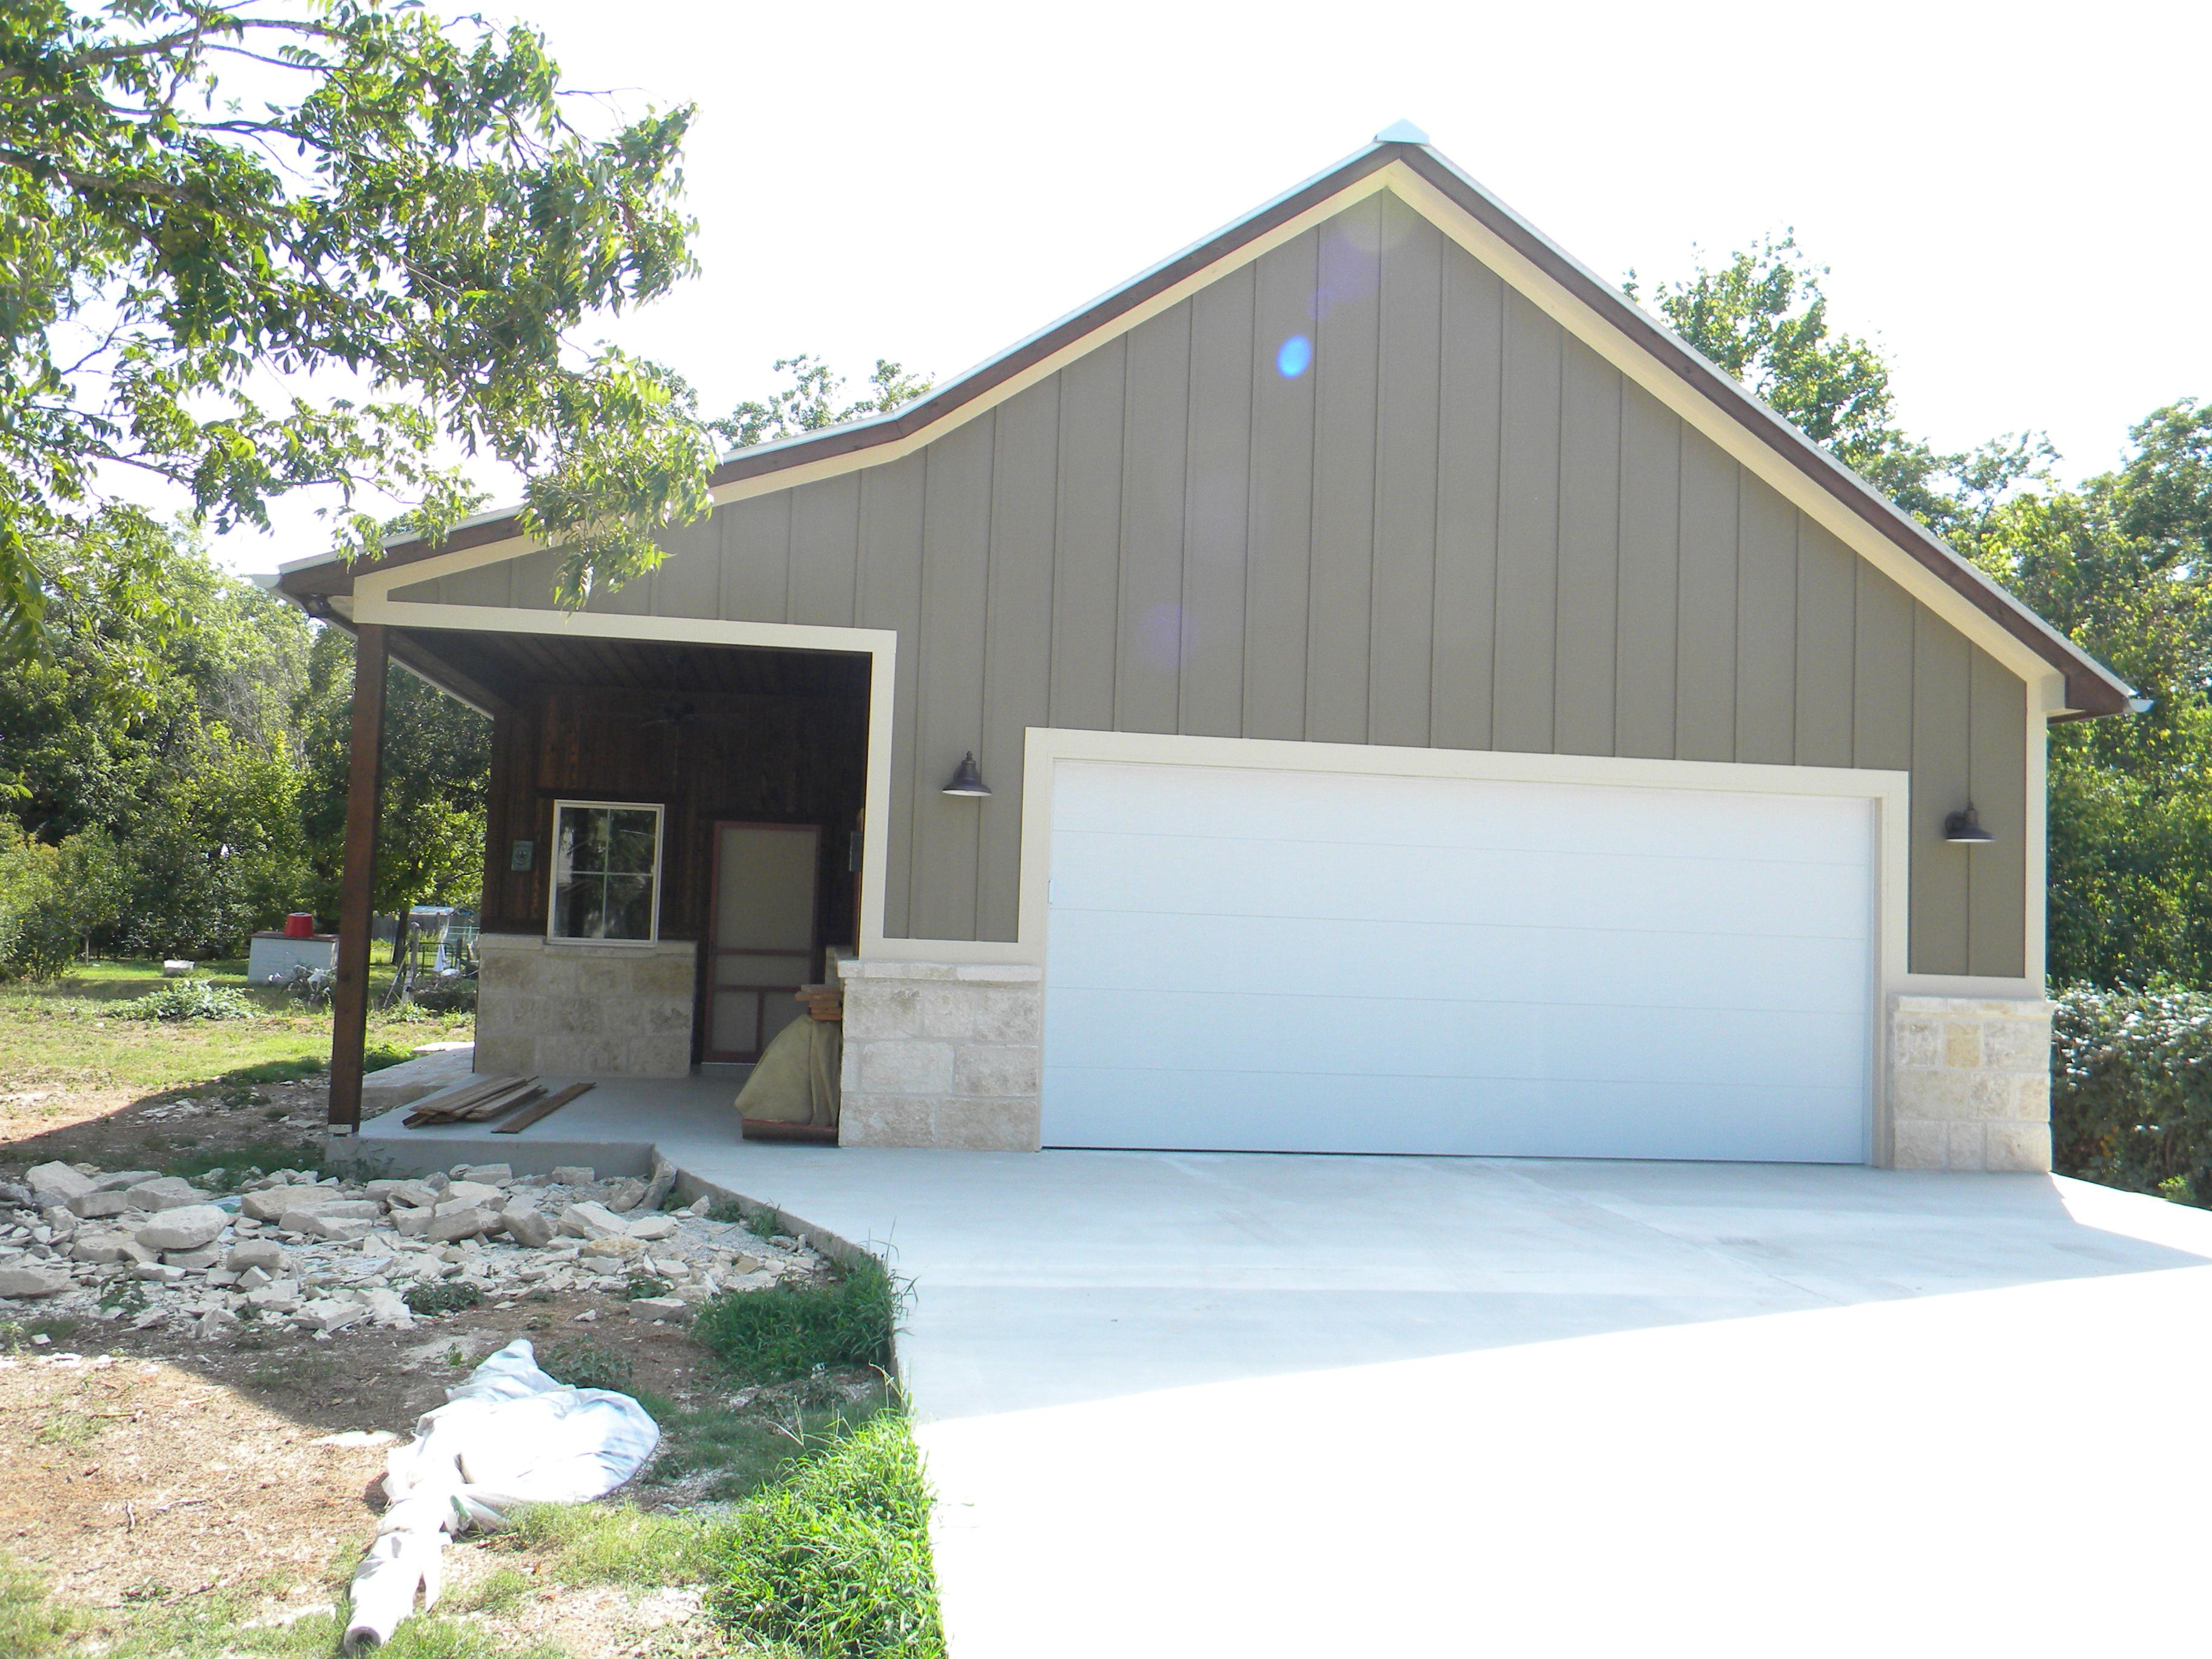 18x8 Flush Steel Garage Door Before Barn Look Faux Paint Faux with regard to dimensions 3648 X 2736